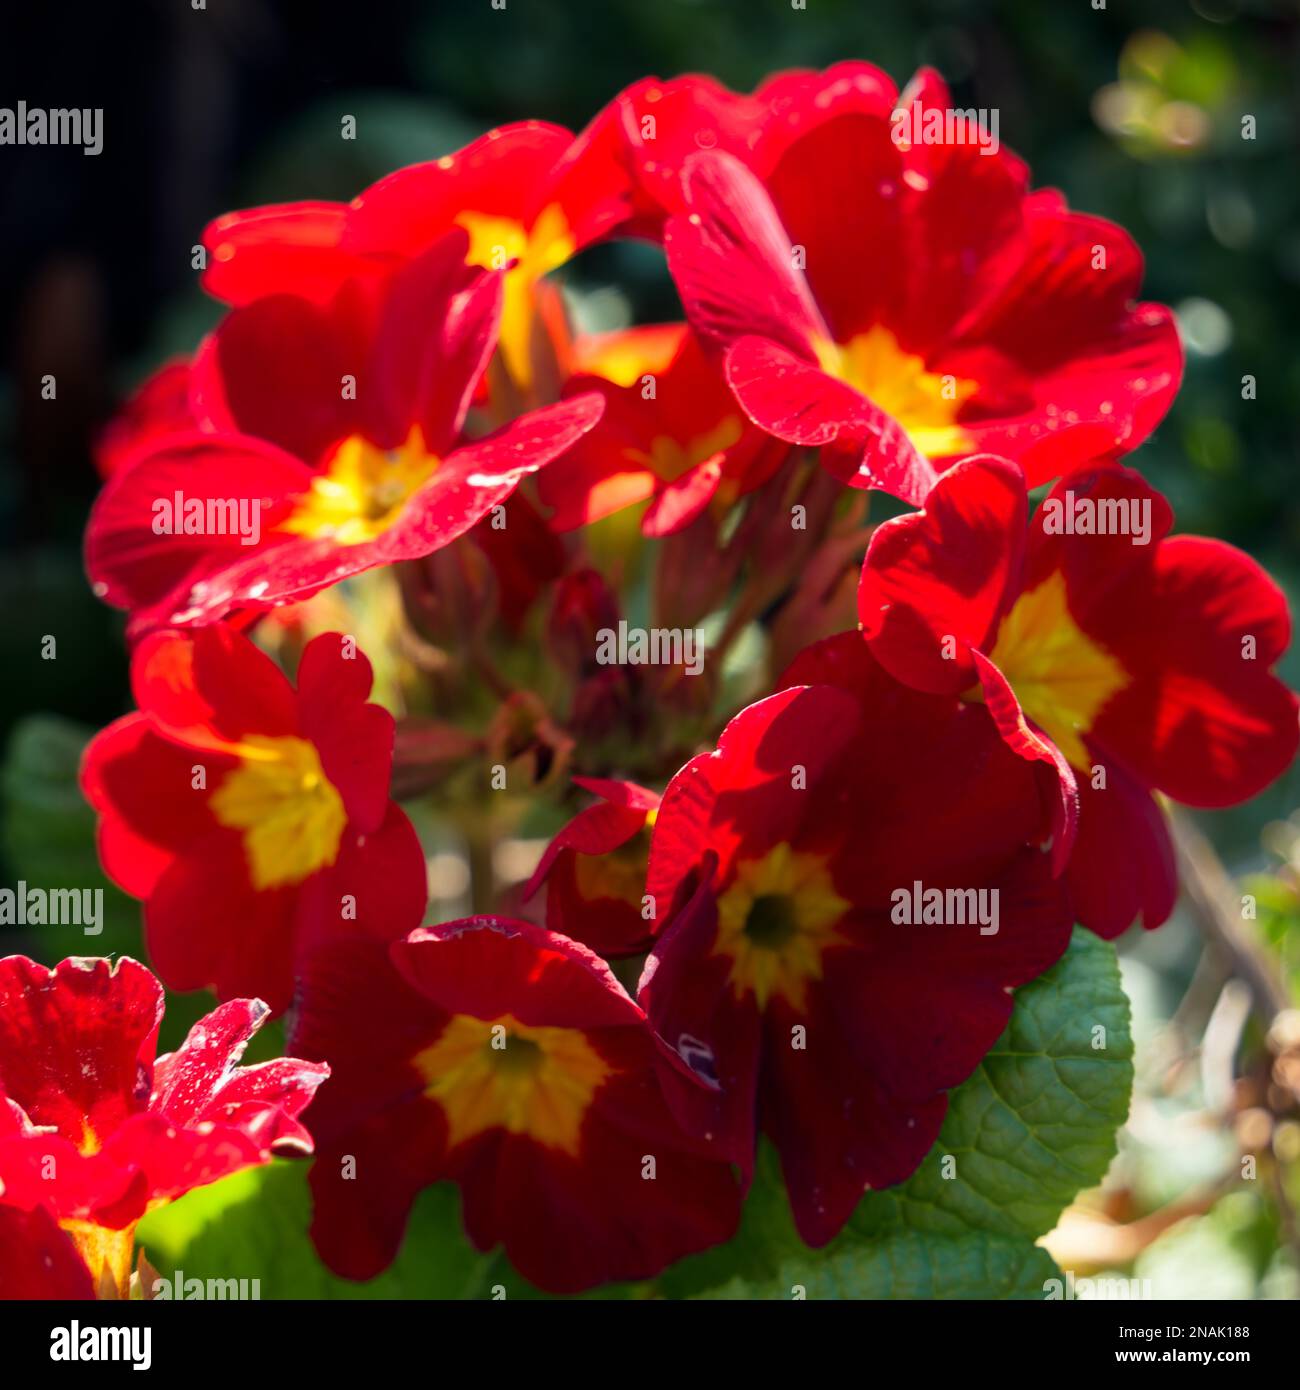 A group of red Primroses flowering in the spring sunshine Stock Photo